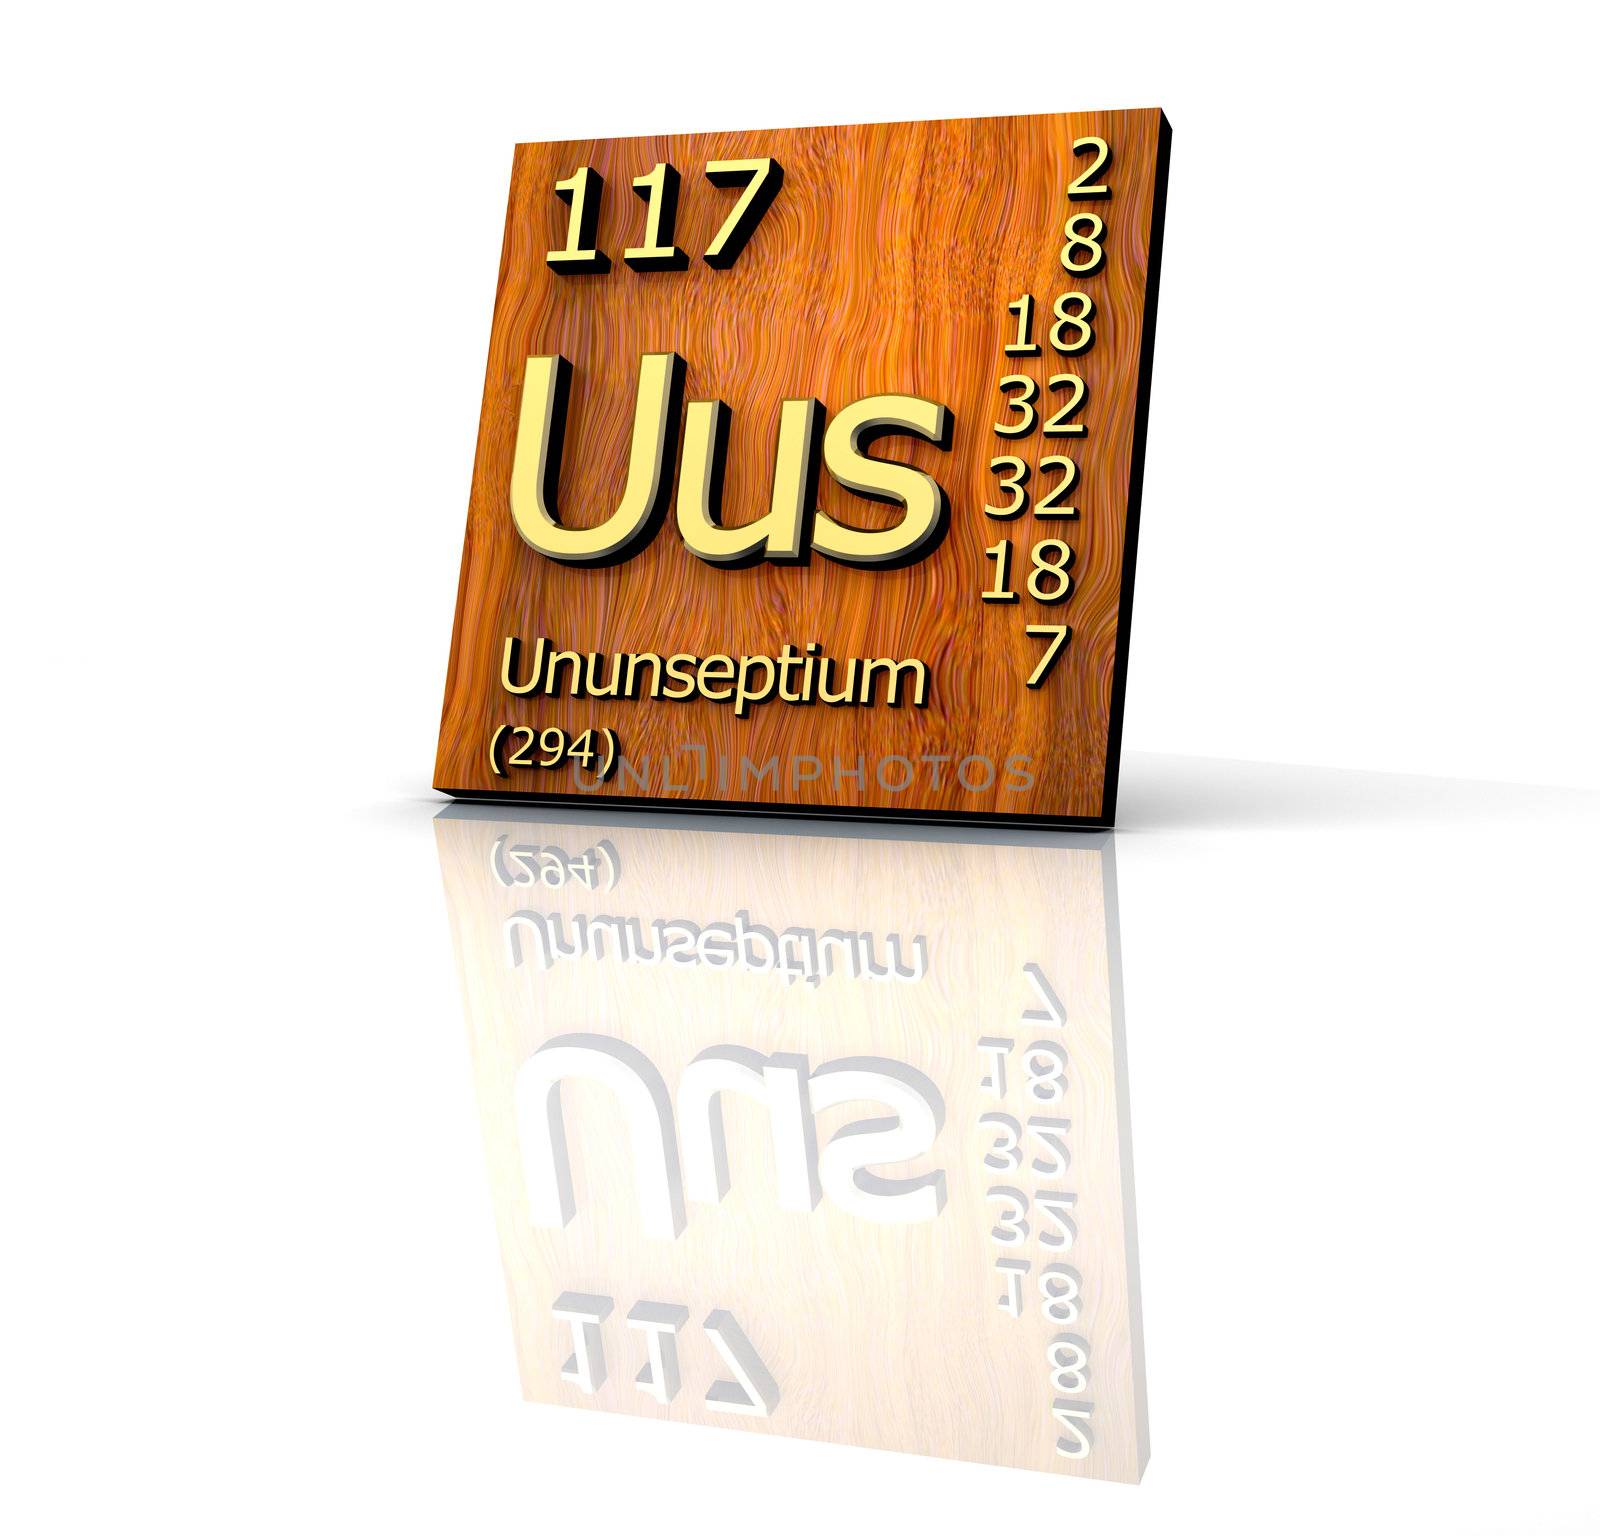 Ununseptium from Periodic Table of Elements - wood board - 3d made